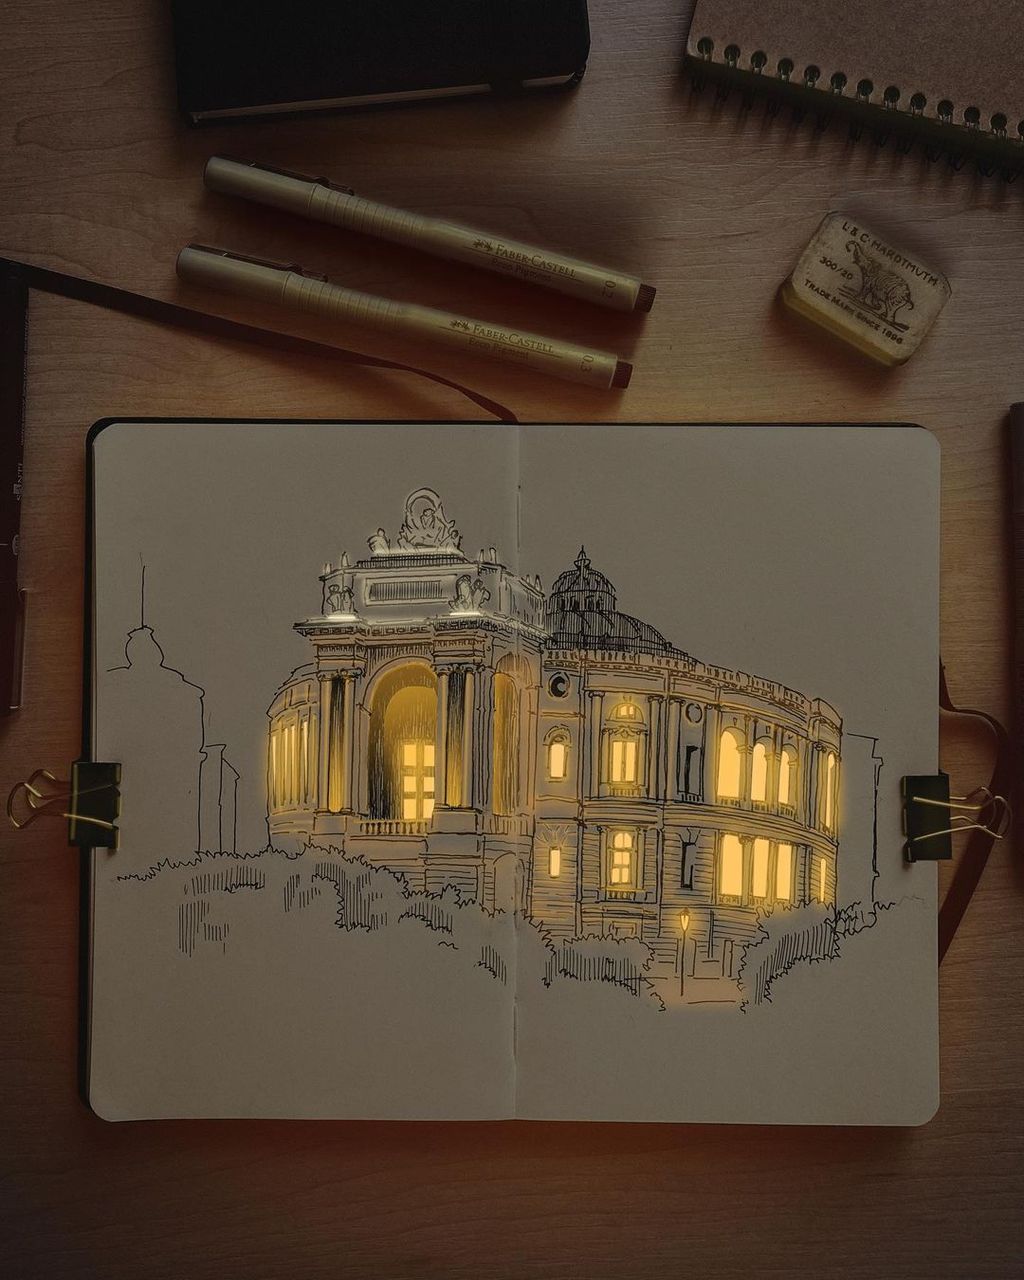 Forrás: Instagram/citiesandsketches